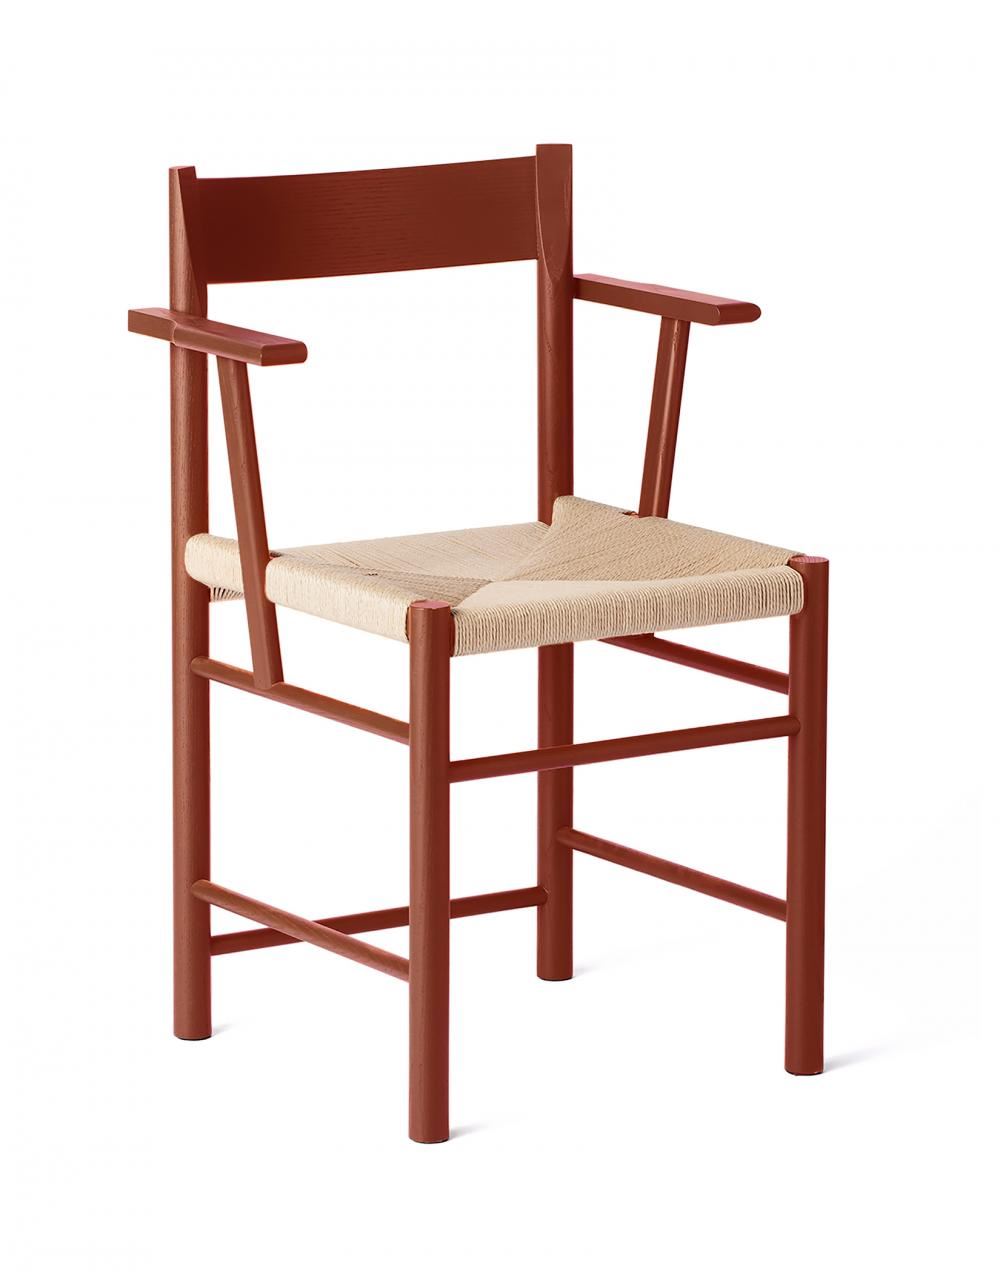 F Dining Chair Red Painted Ash Natural Paper Cord Weaved Seat With Armrest